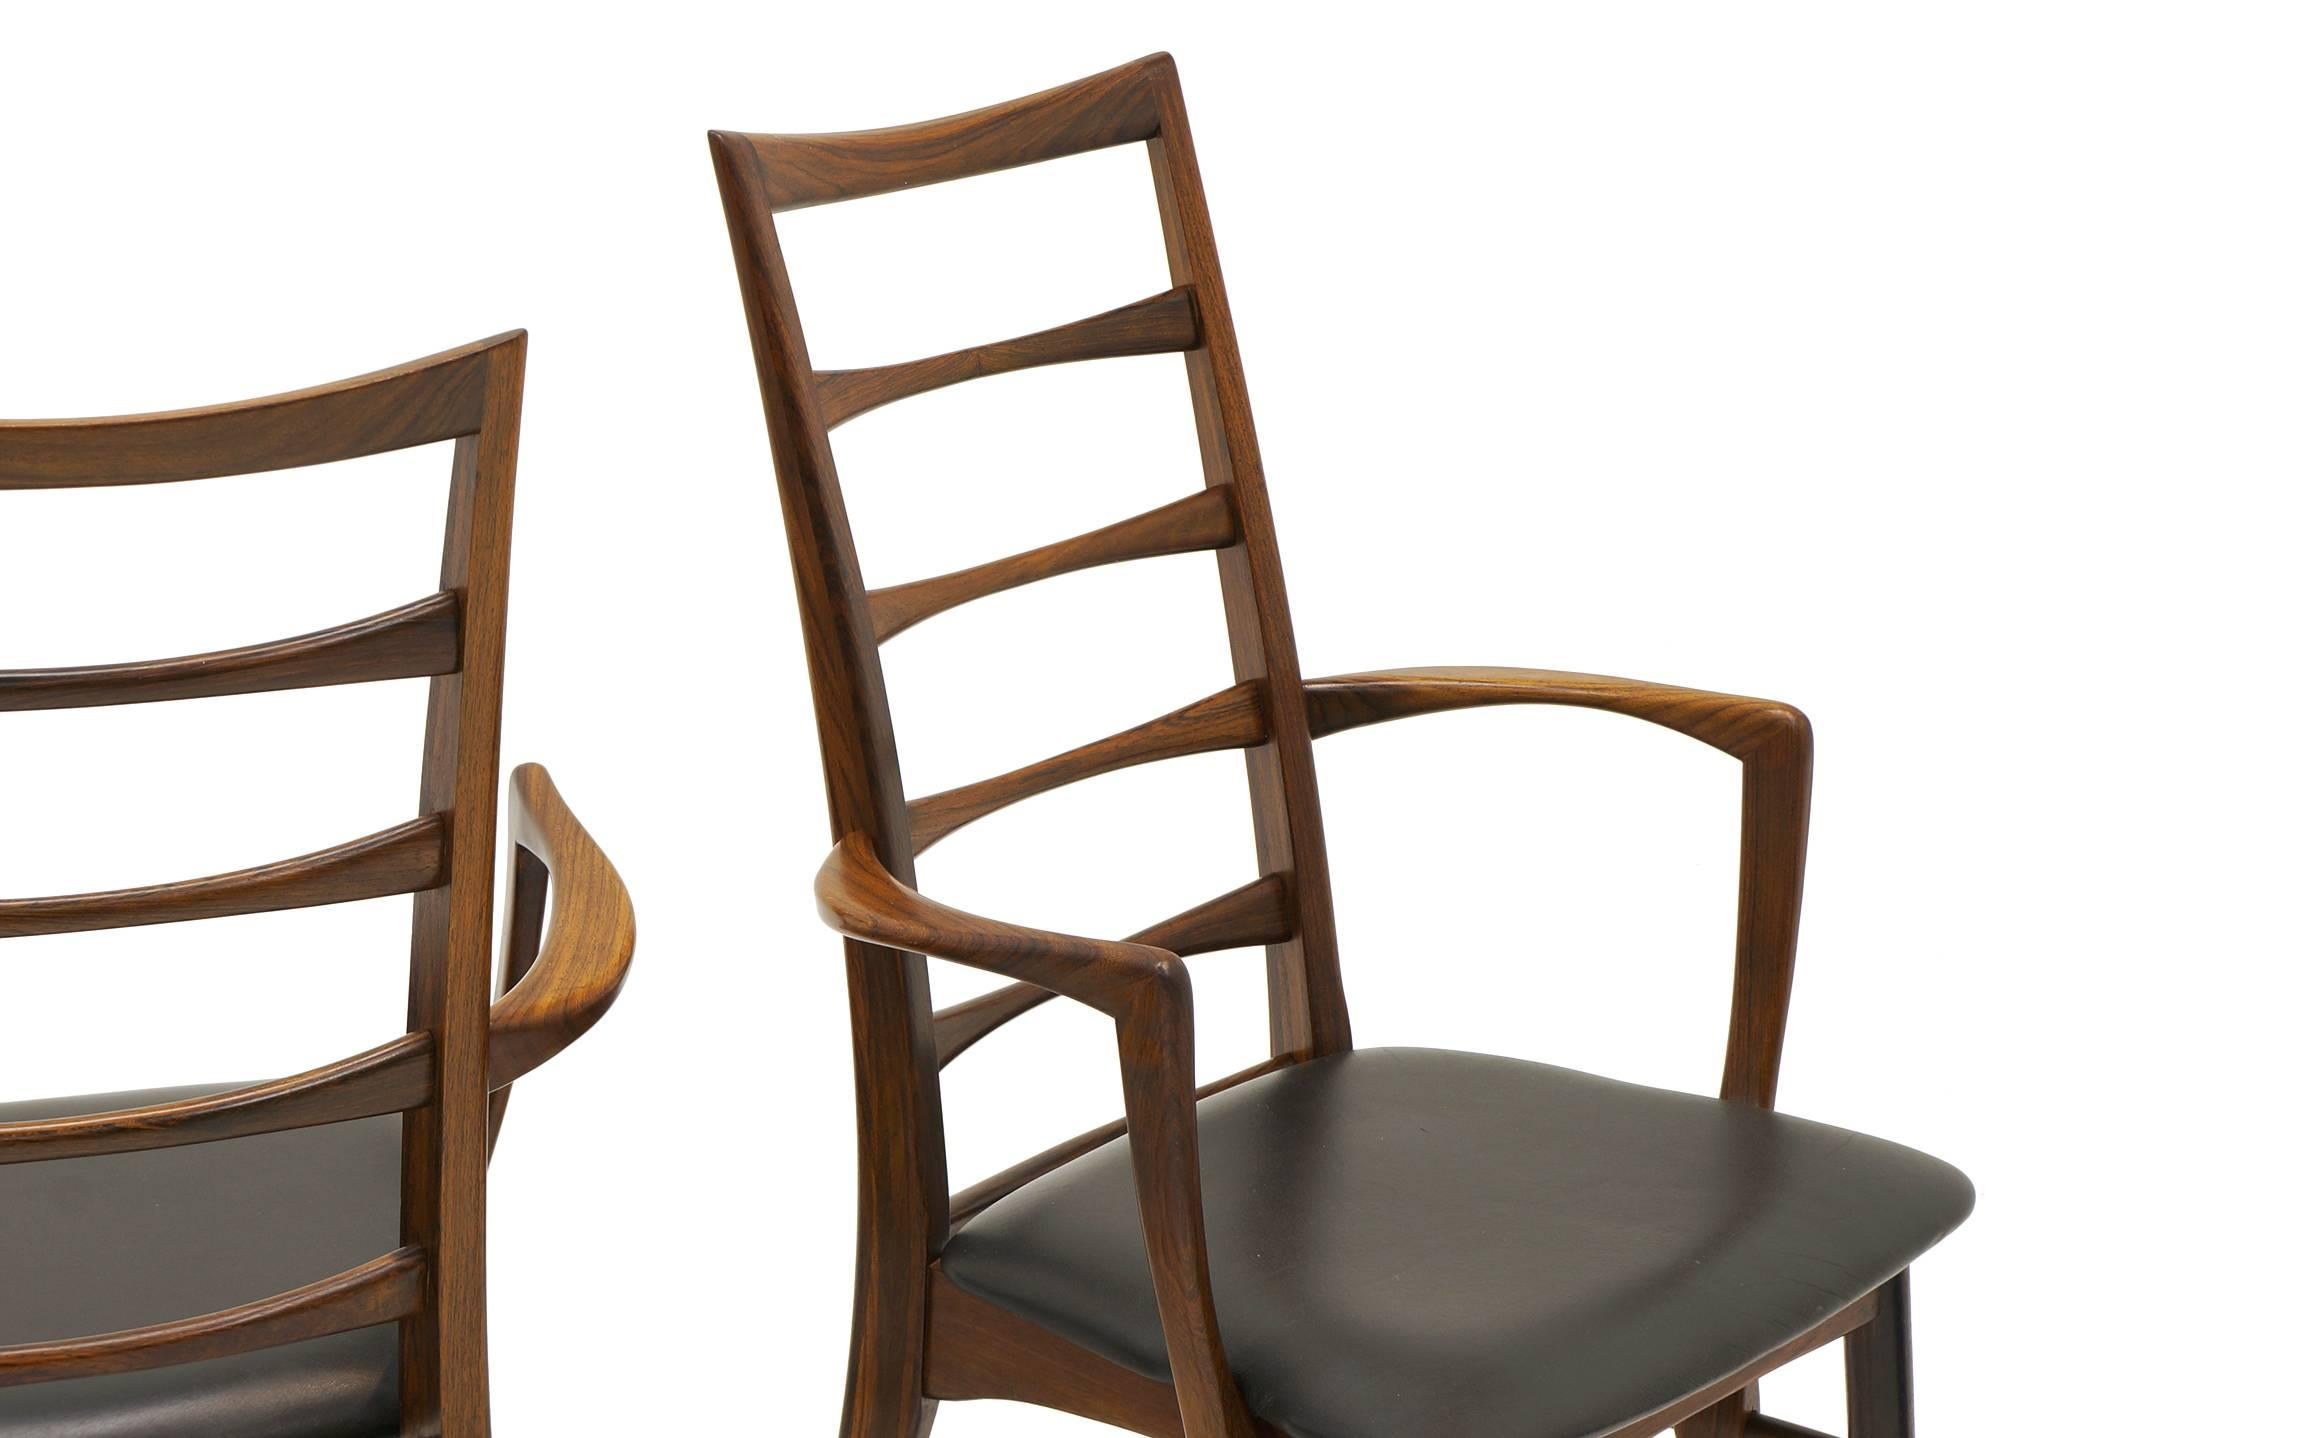 6 Rosewood Lis Dining Chairs by Niels Kofoed, Two with arms, Four armless 1